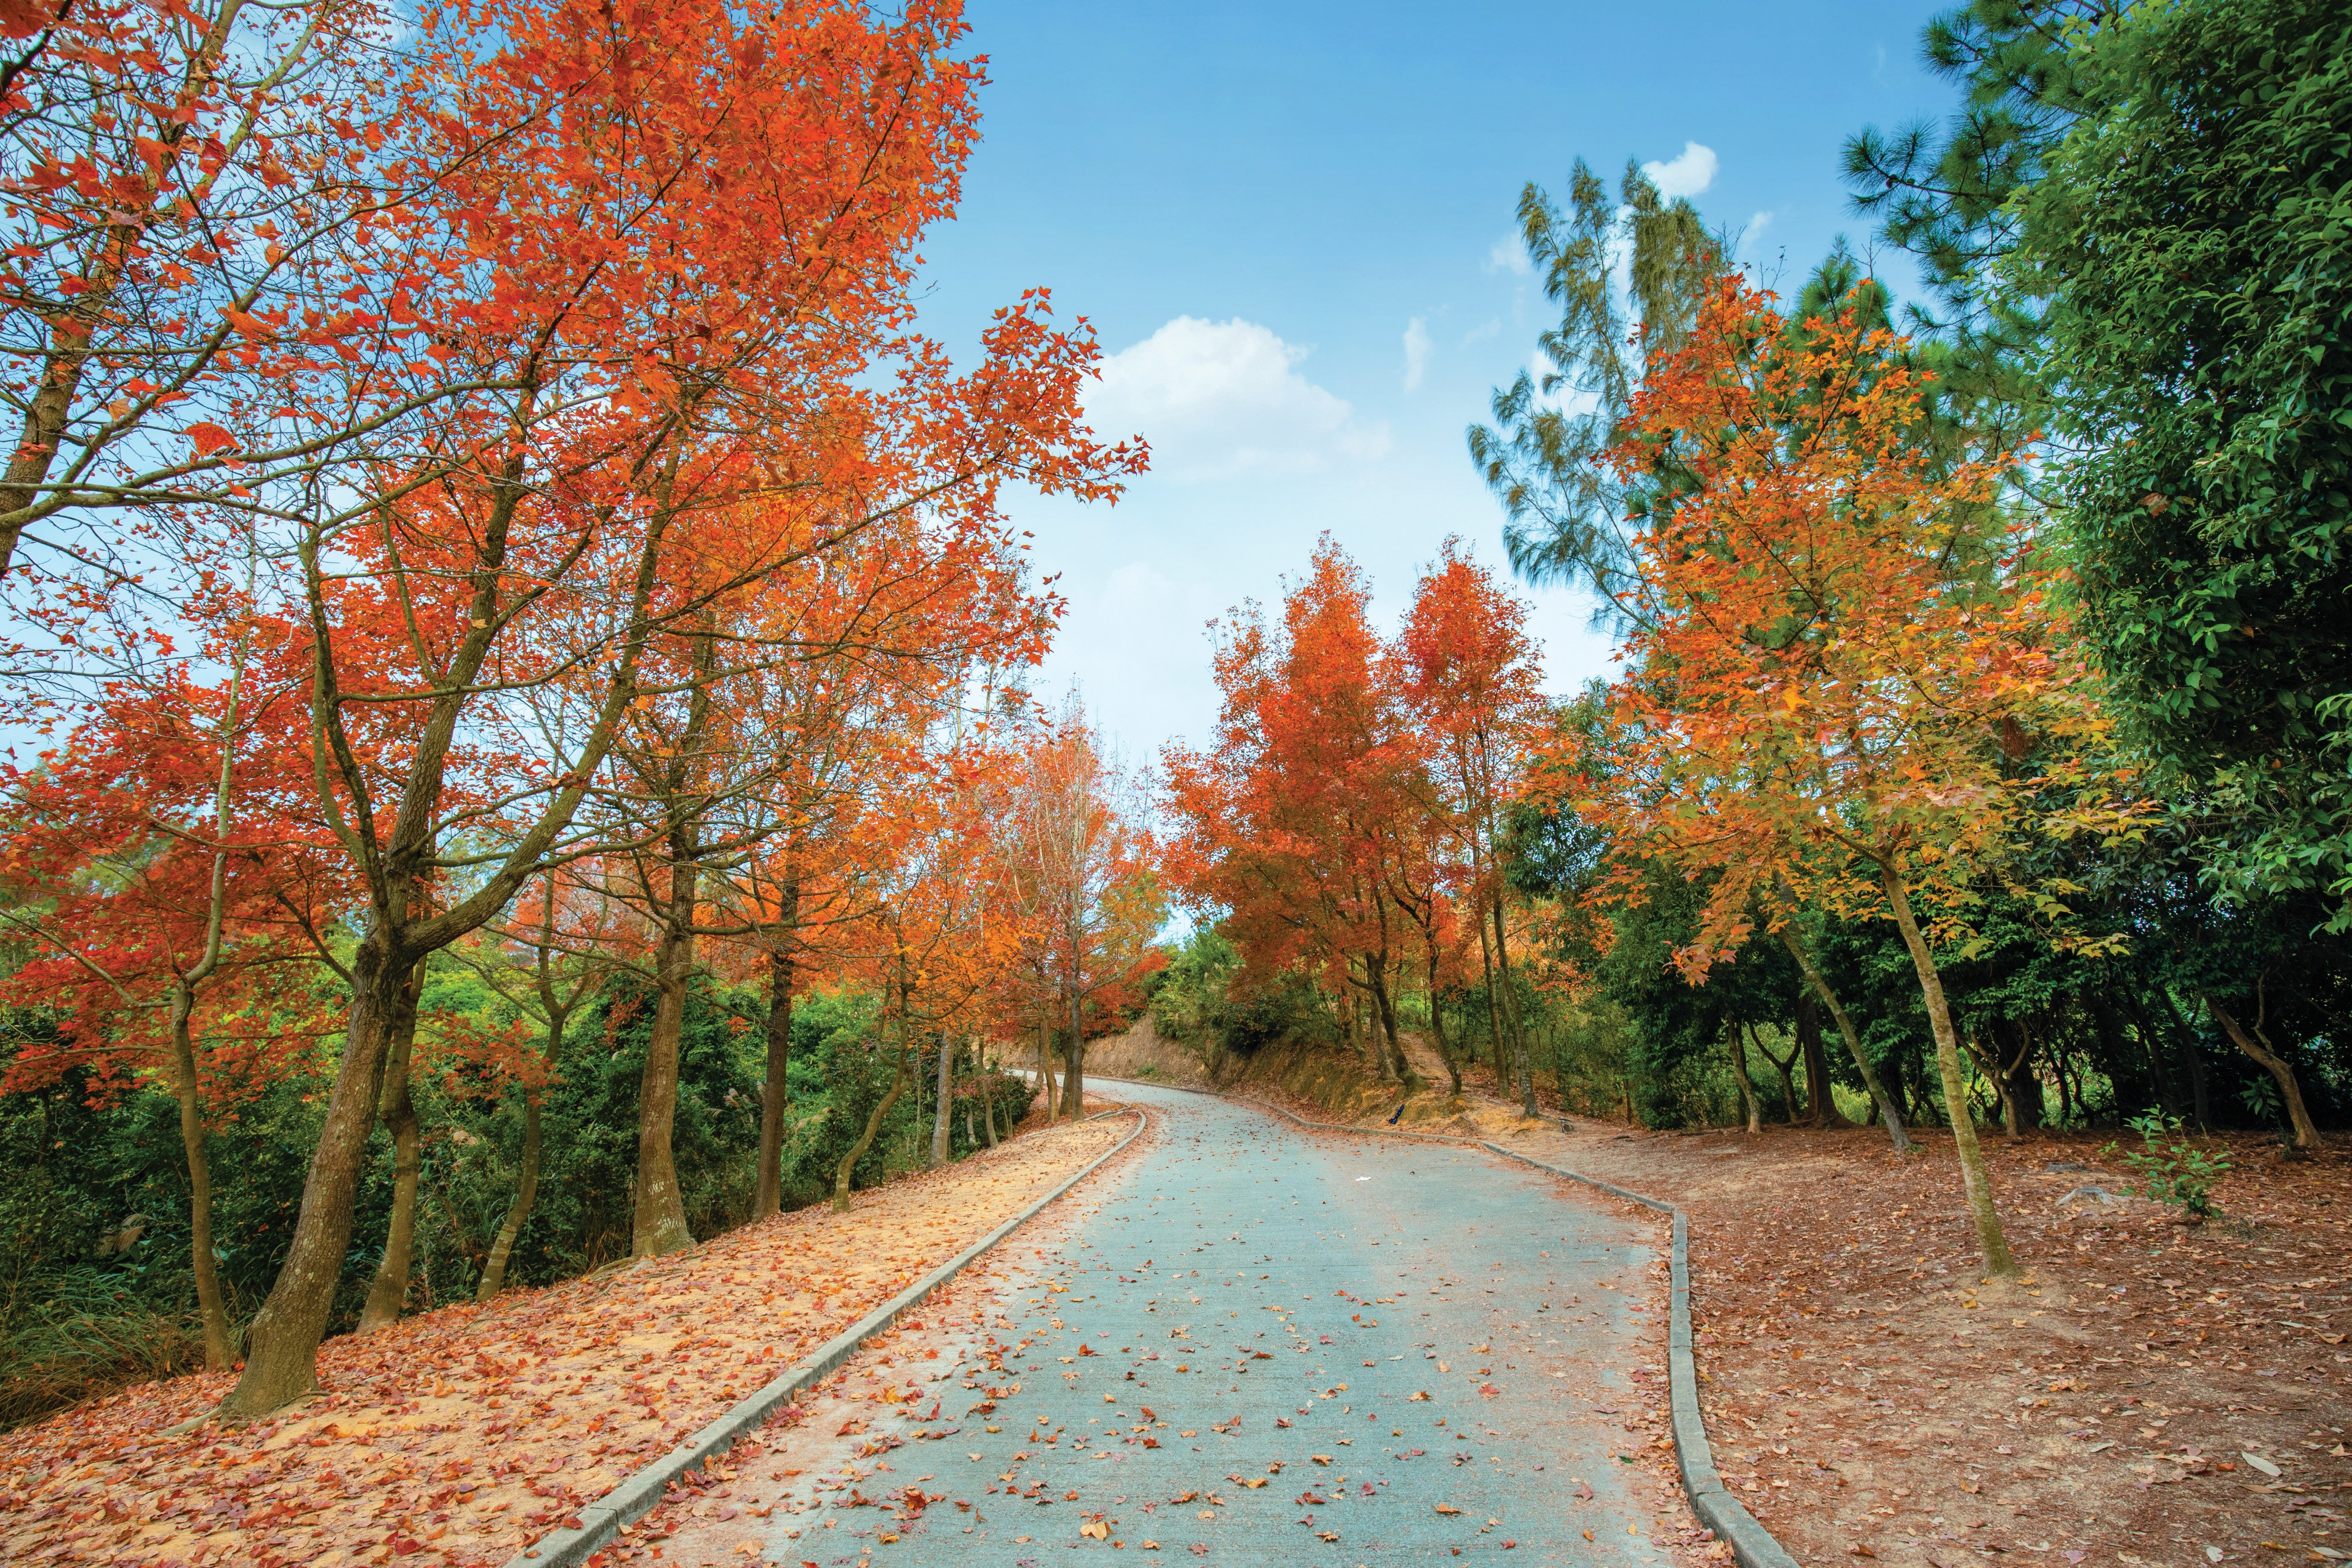 The bright yellow, fiery orange and crimson red autumn and winter hues of trees in Sweet Gum Woods, attract many visitors each year to Tai Lam Country Park in Hong Kong’s Western New Territories. 